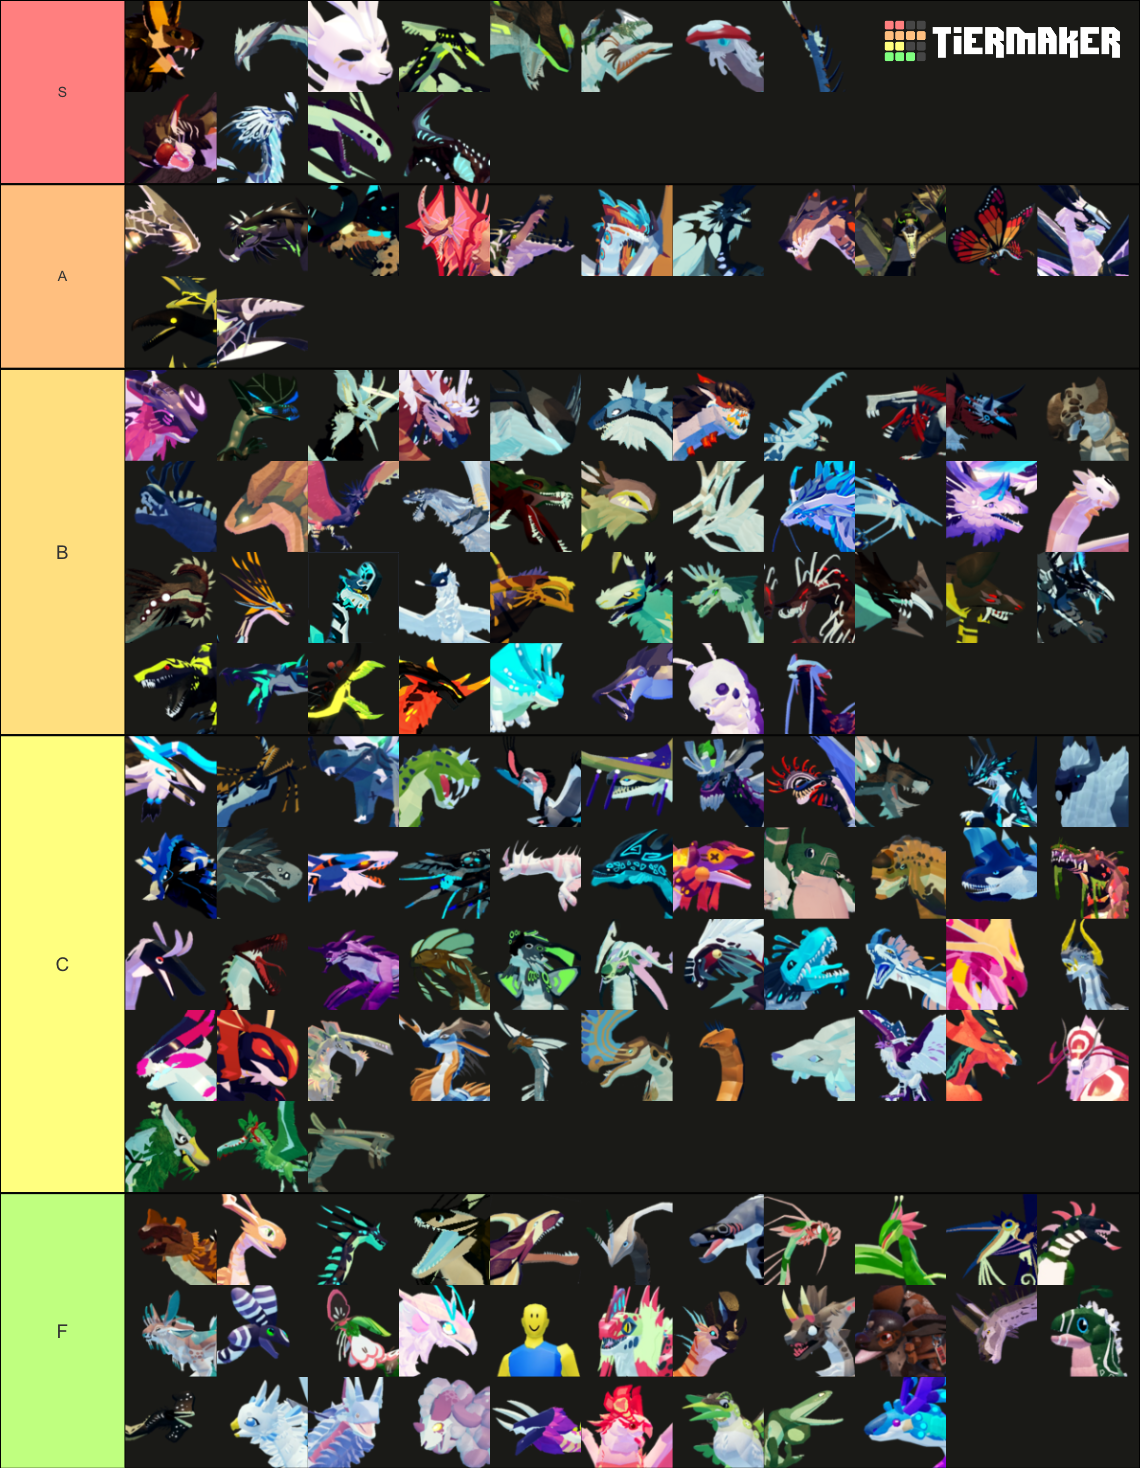 PVP Tier List! Roblox Creatures of Sonaria (OUTDATED) 